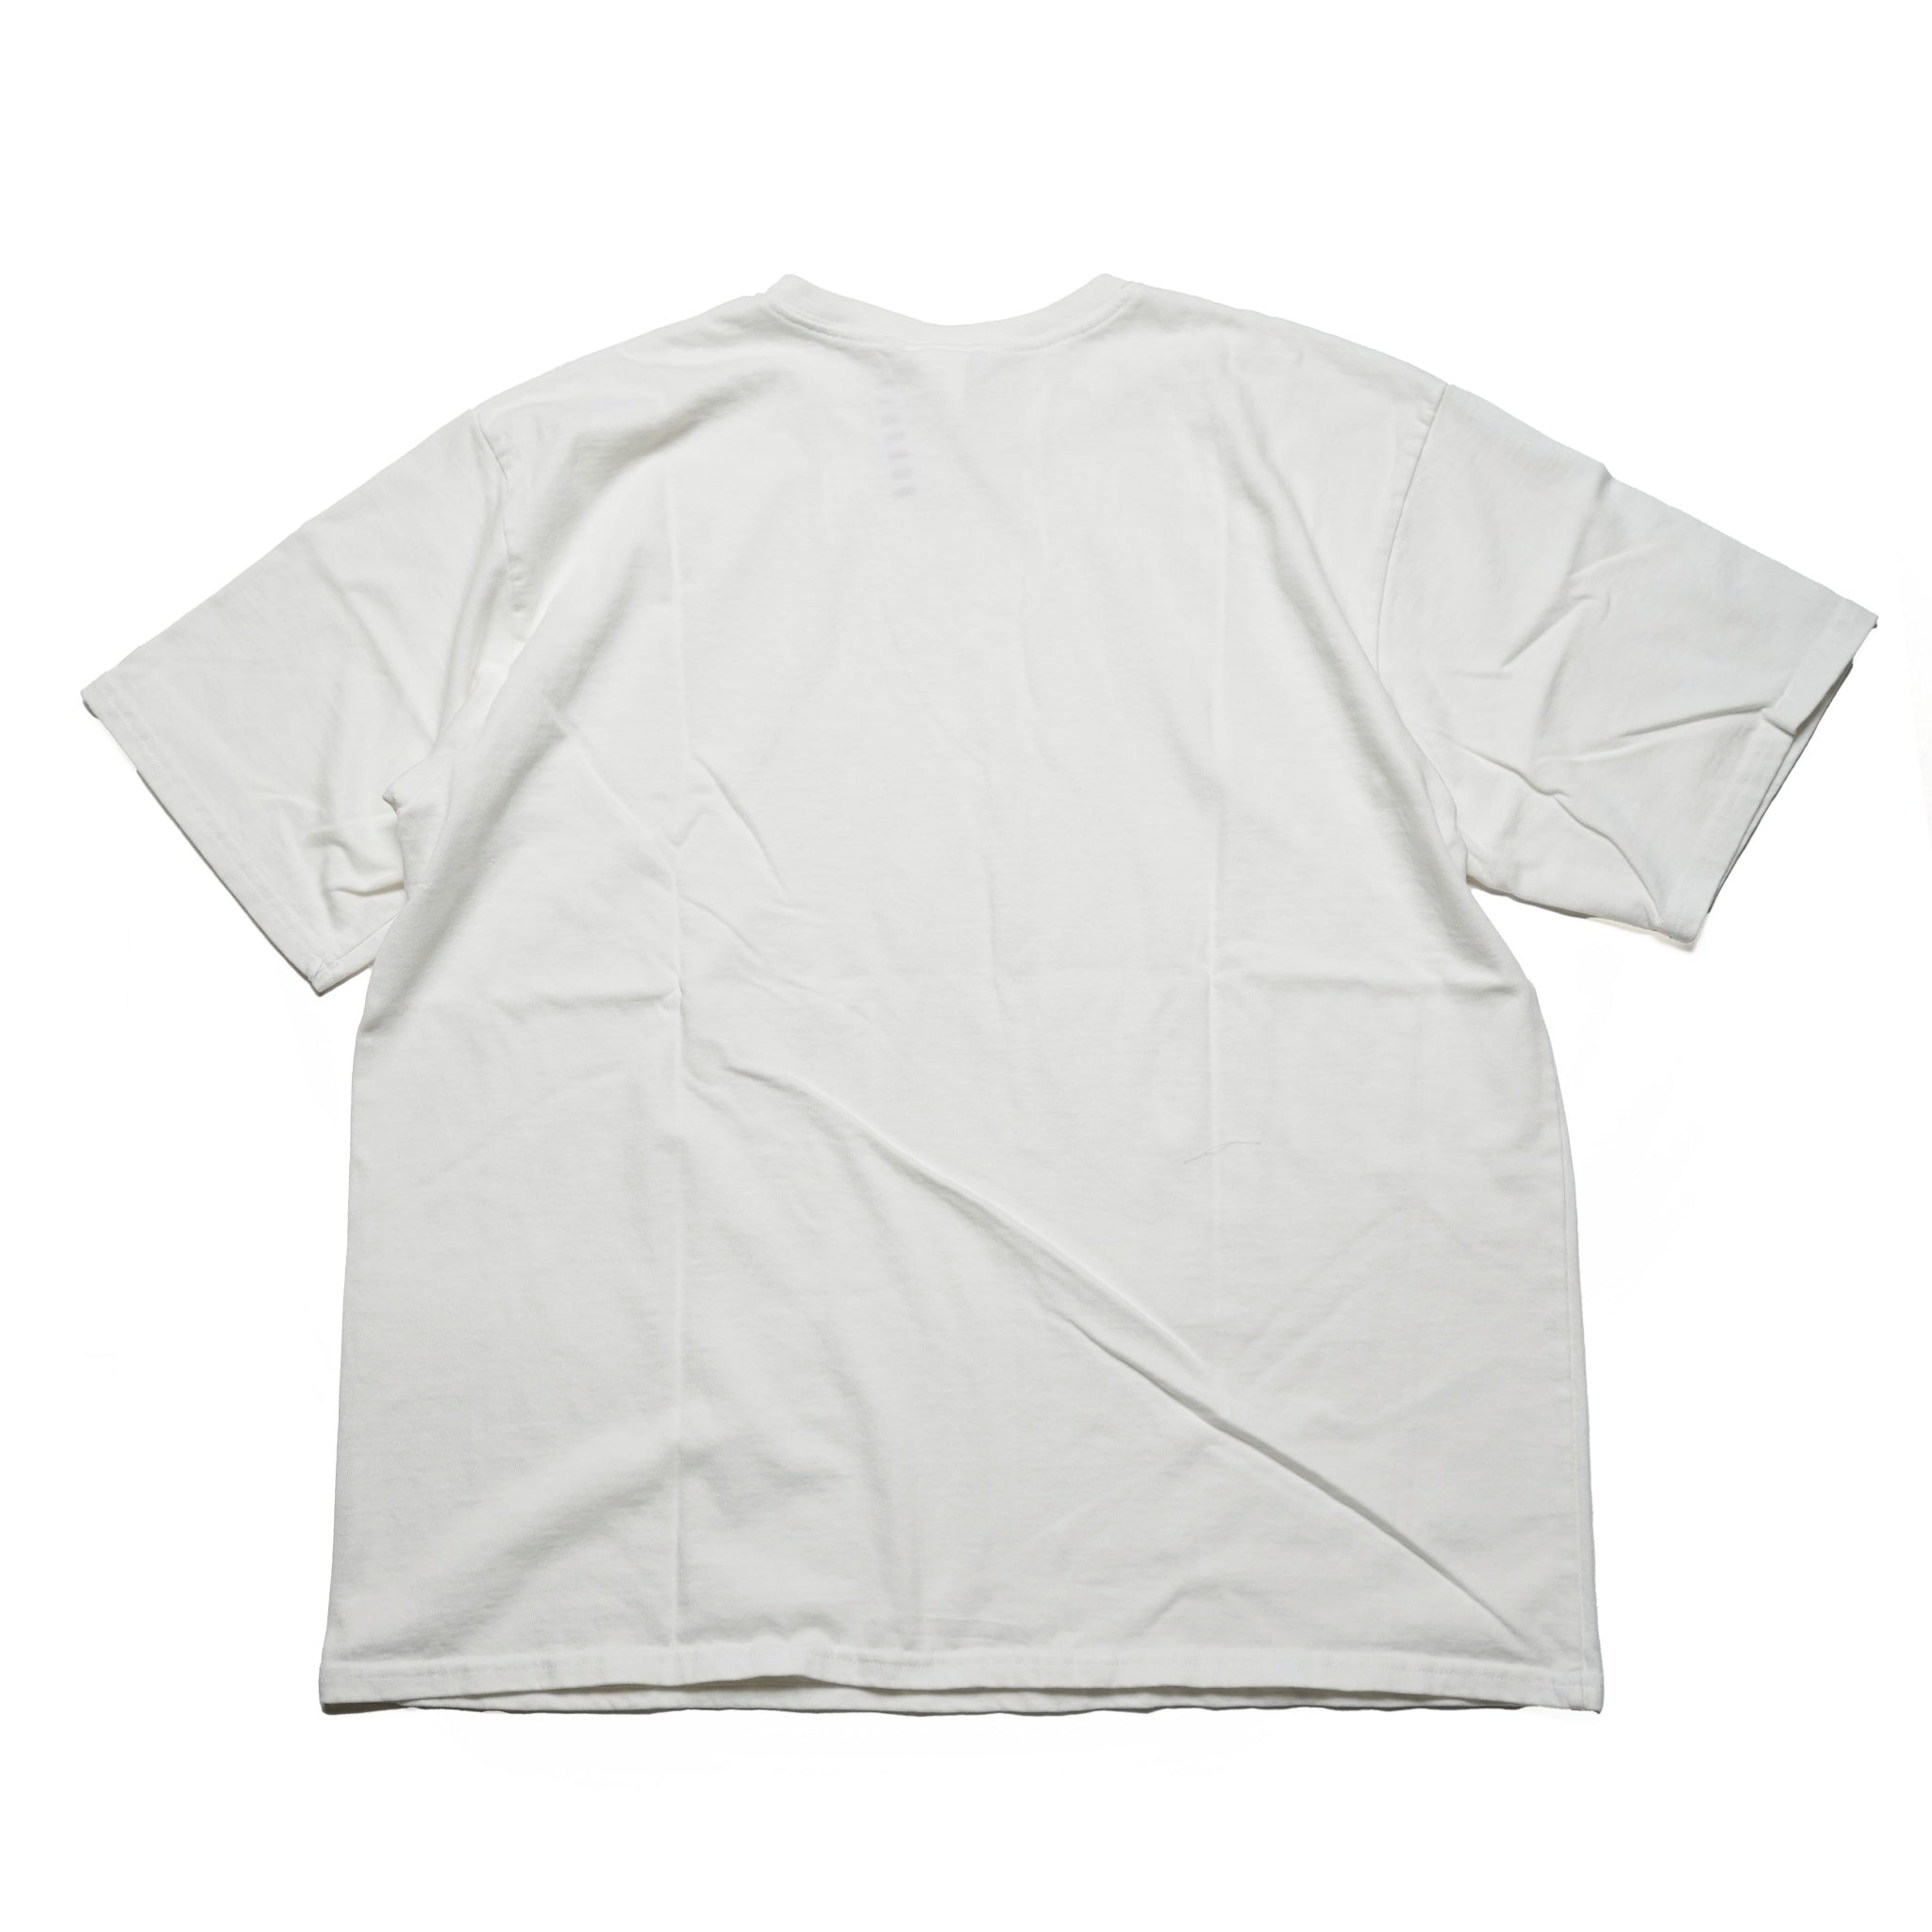 No:cstm01 | Name:Heavy Coton SS Tee | Color:#White| Size:M/L/XL | 【SMOKE T ONE】【Smoke T One】【ONE CS FITS ALL】